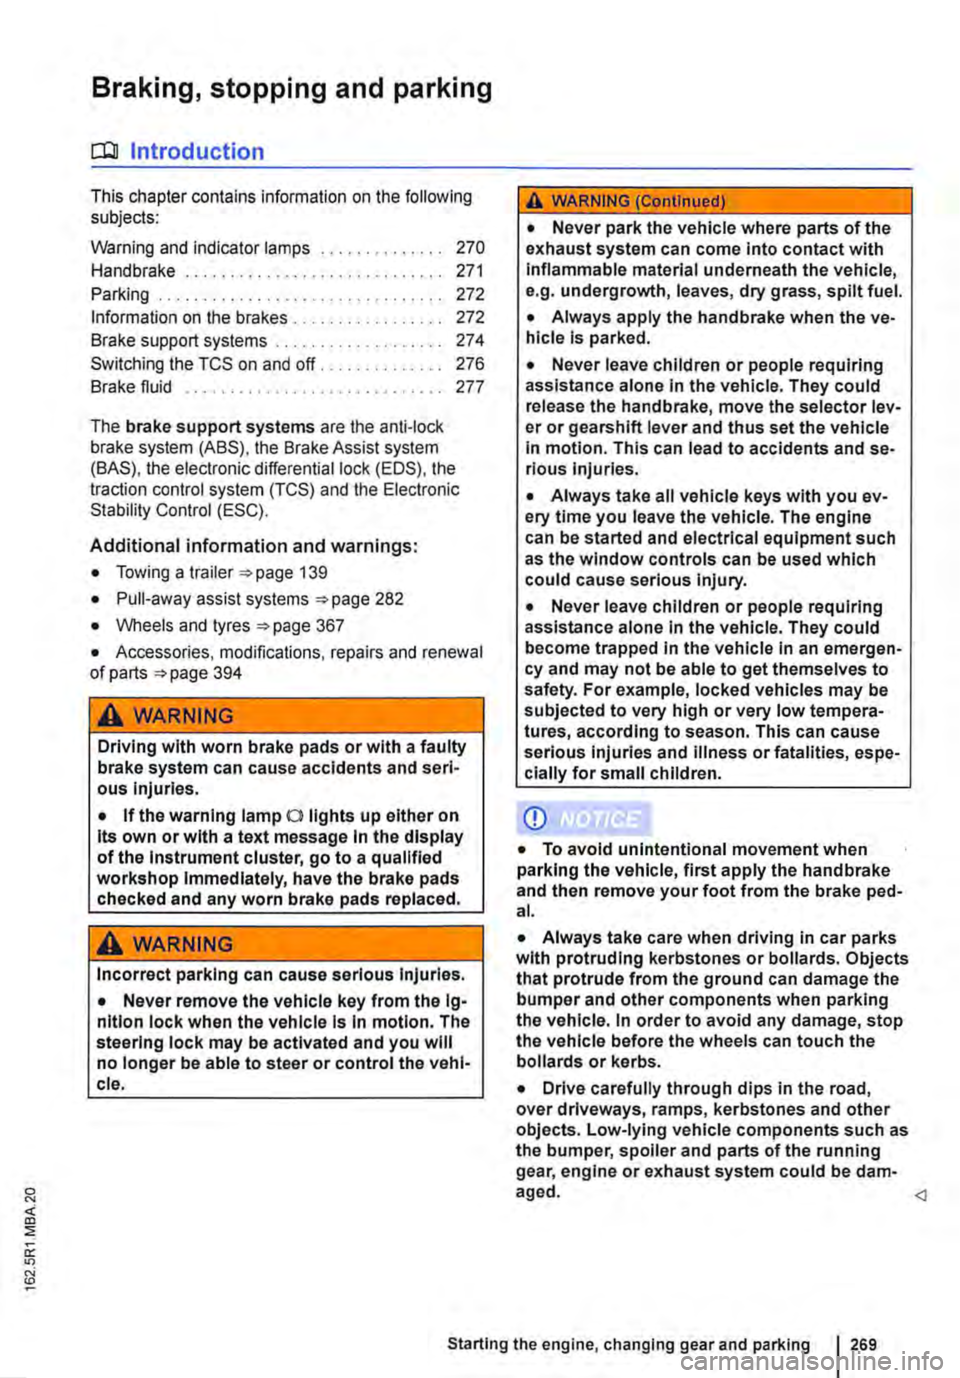 VOLKSWAGEN TRANSPORTER 2012  Owners Manual Braking, stopping and parking 
COl Introduction 
This chapter contains information on the following subjects: 
Warning and indicator lamps Handbrake ............................ . 
Parking . . . . . .